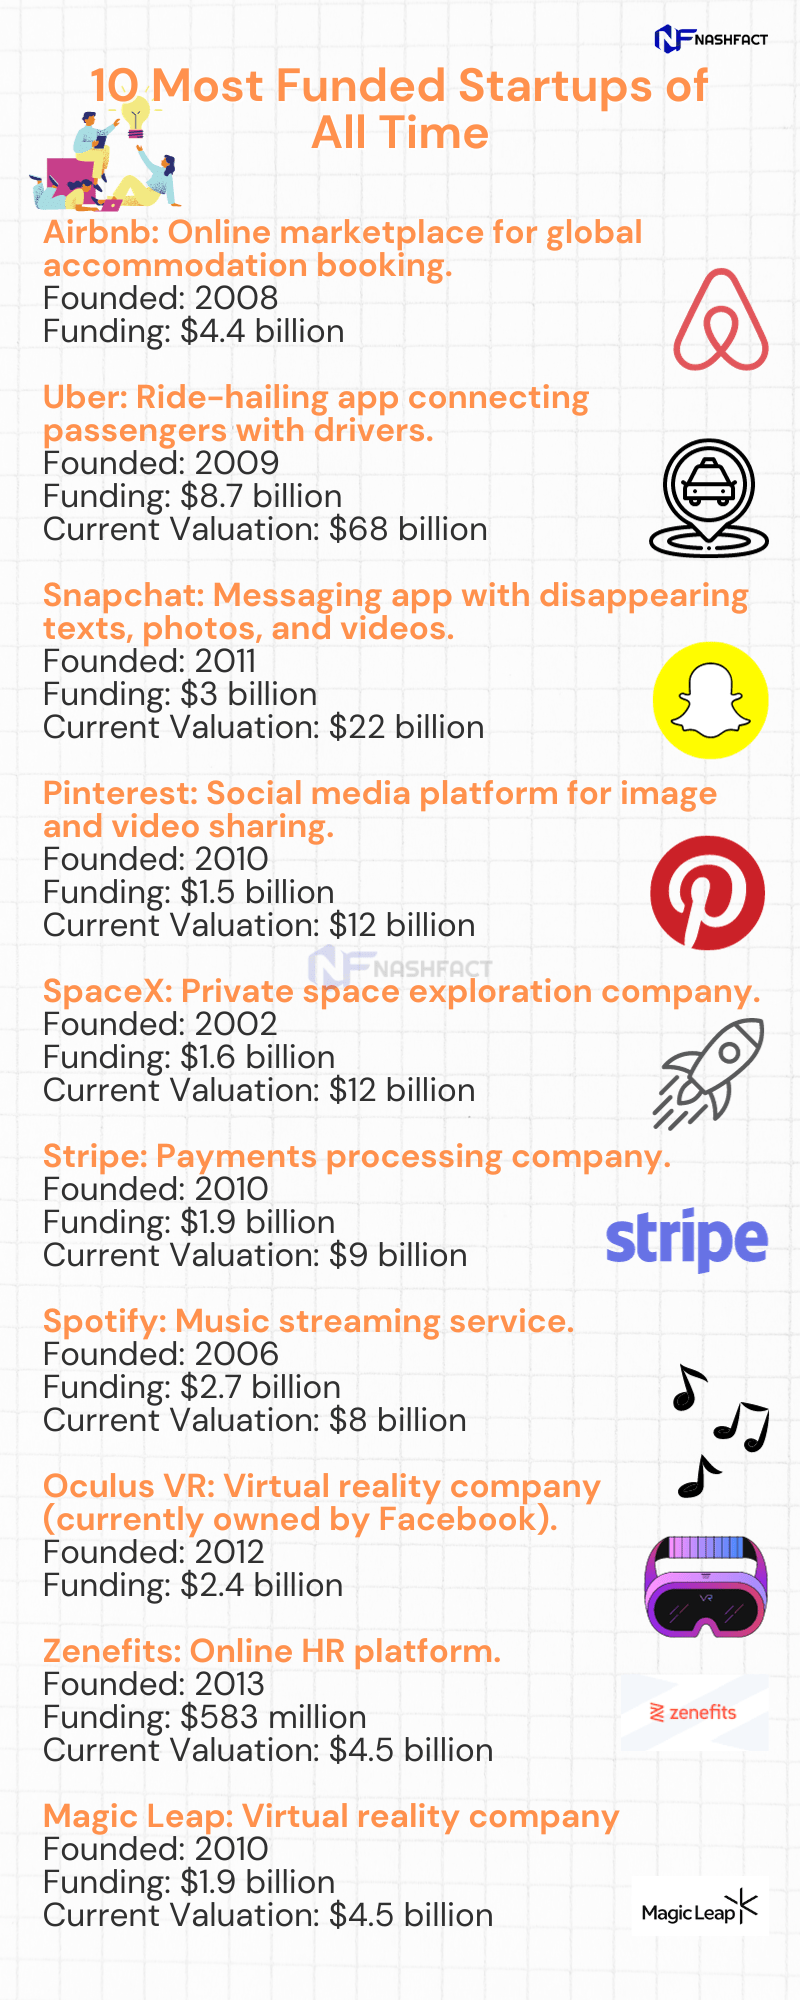 Top ten most funded startups of all time